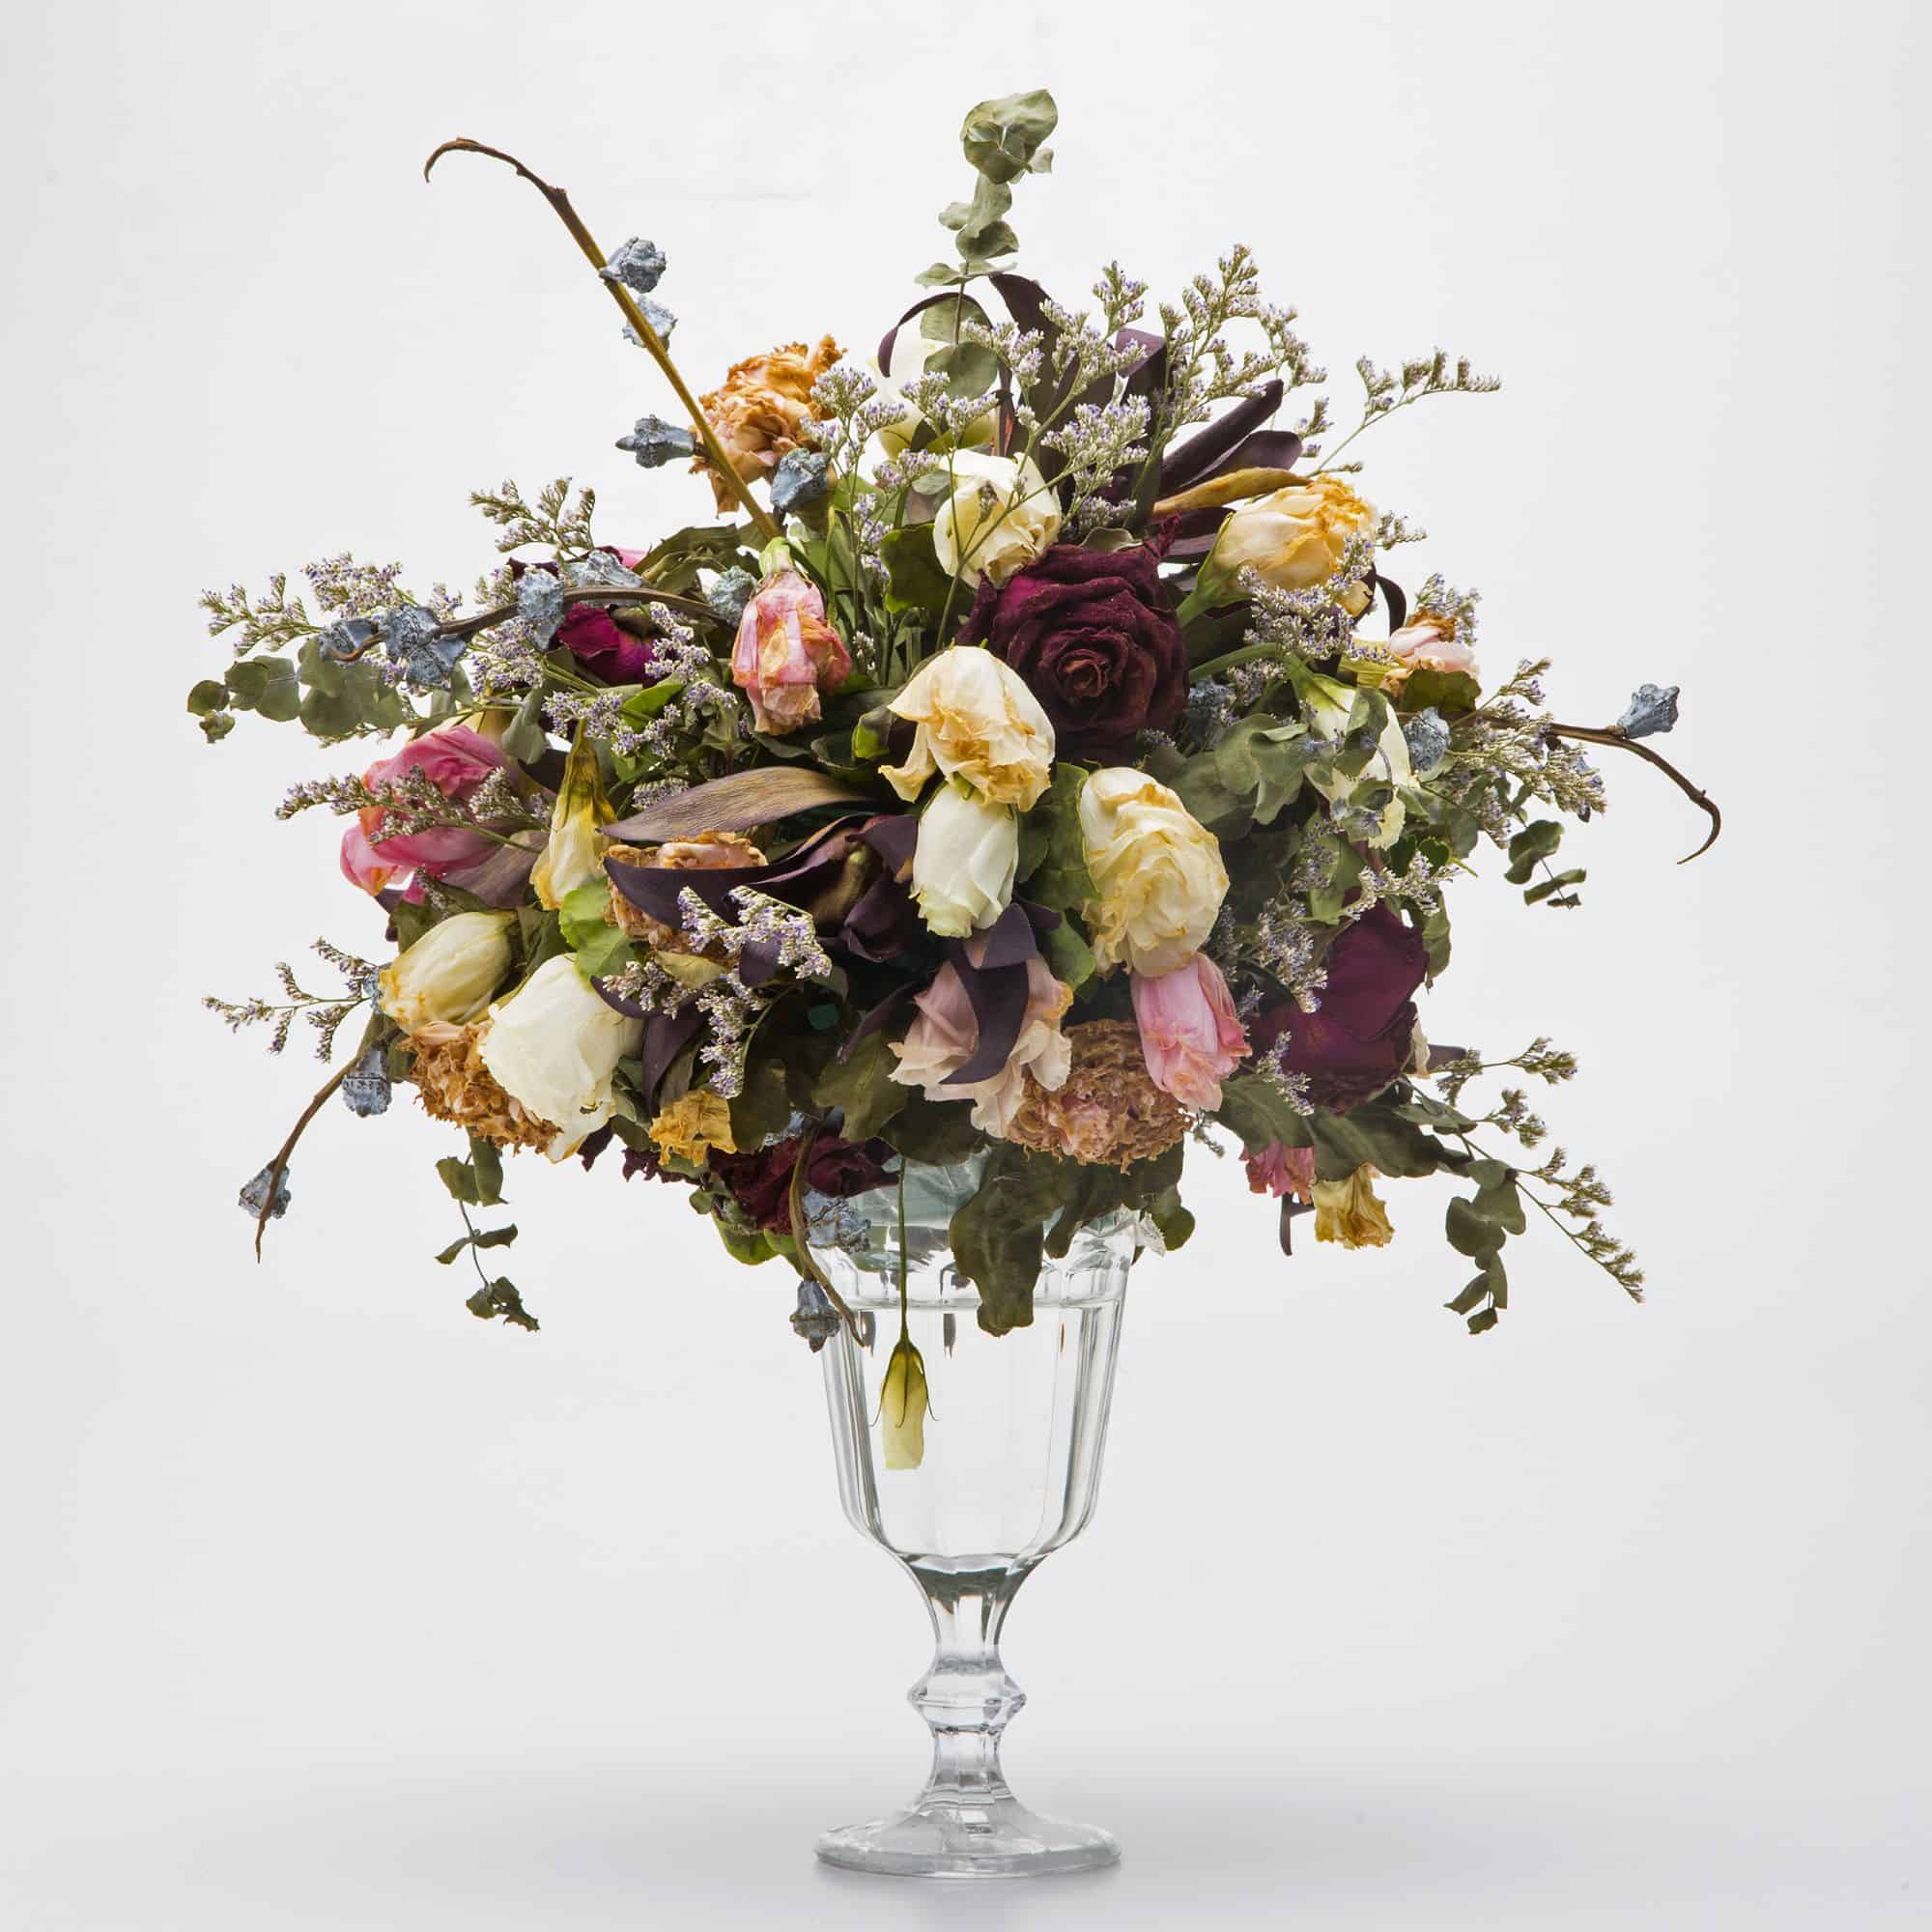 bouquest of dried flowers in a glass vase